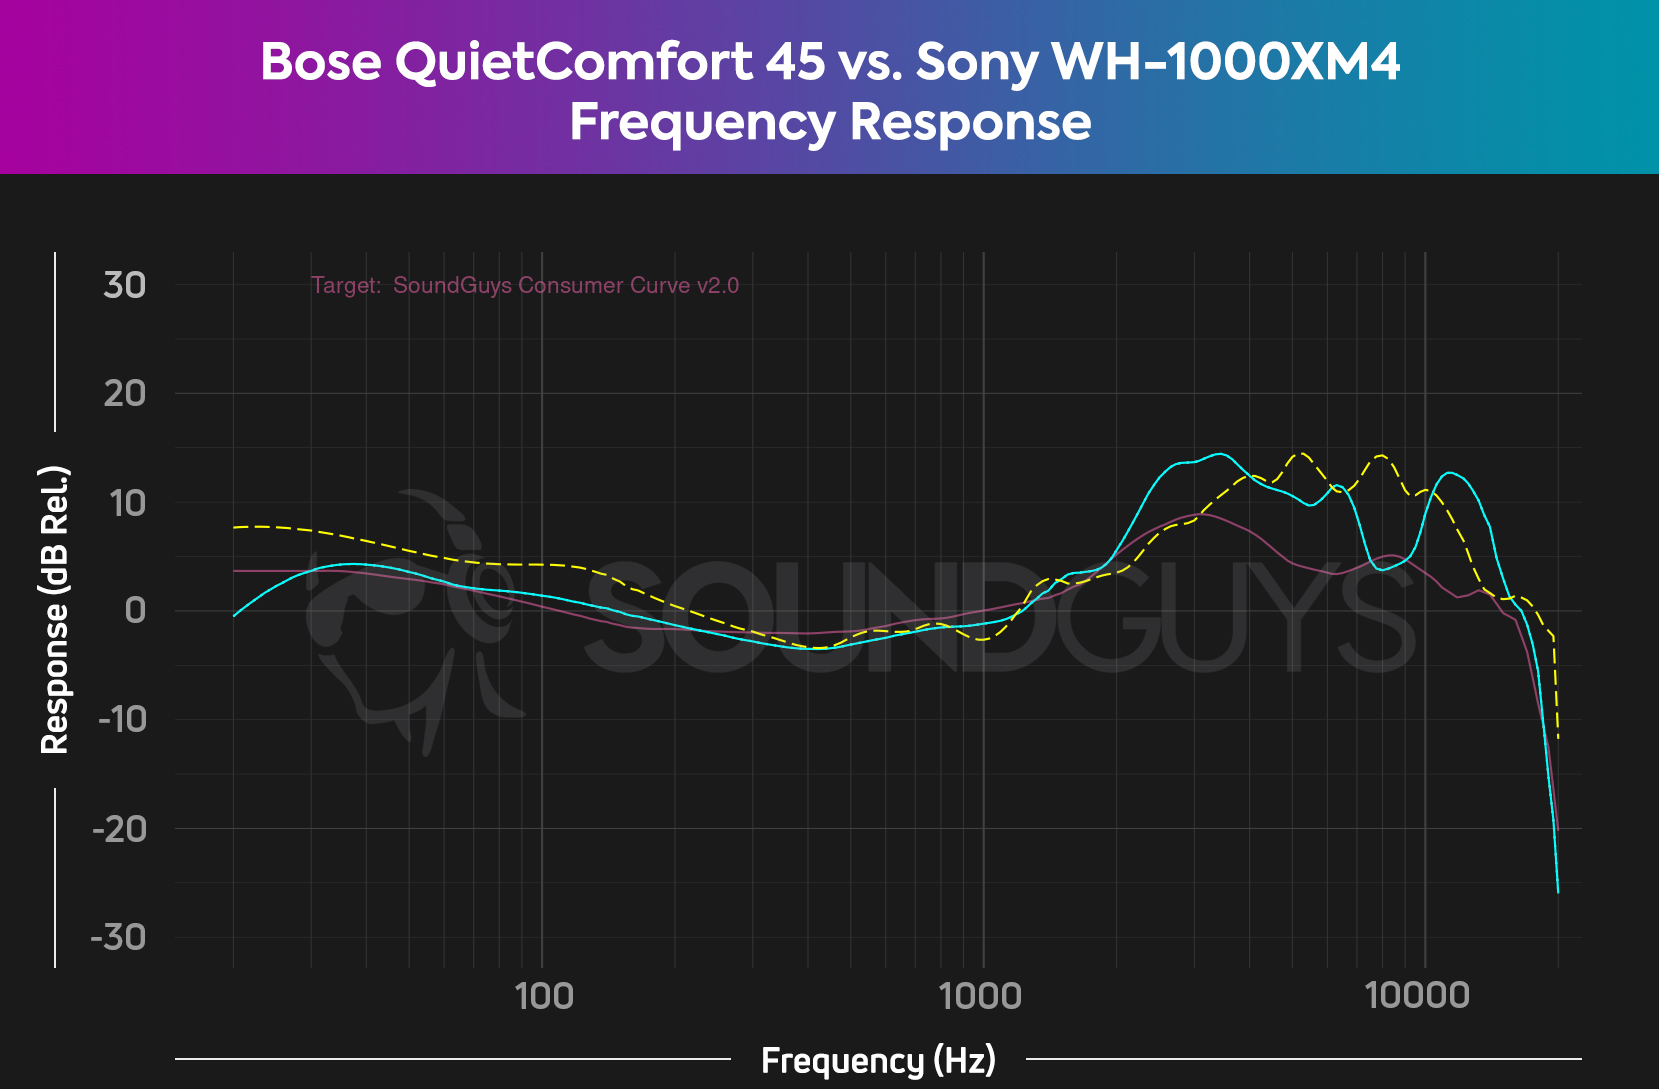 A plot showing the less consistent frequency response of the Bose QuietComfort 45 compared to the popular Sony WH-1000XM4.